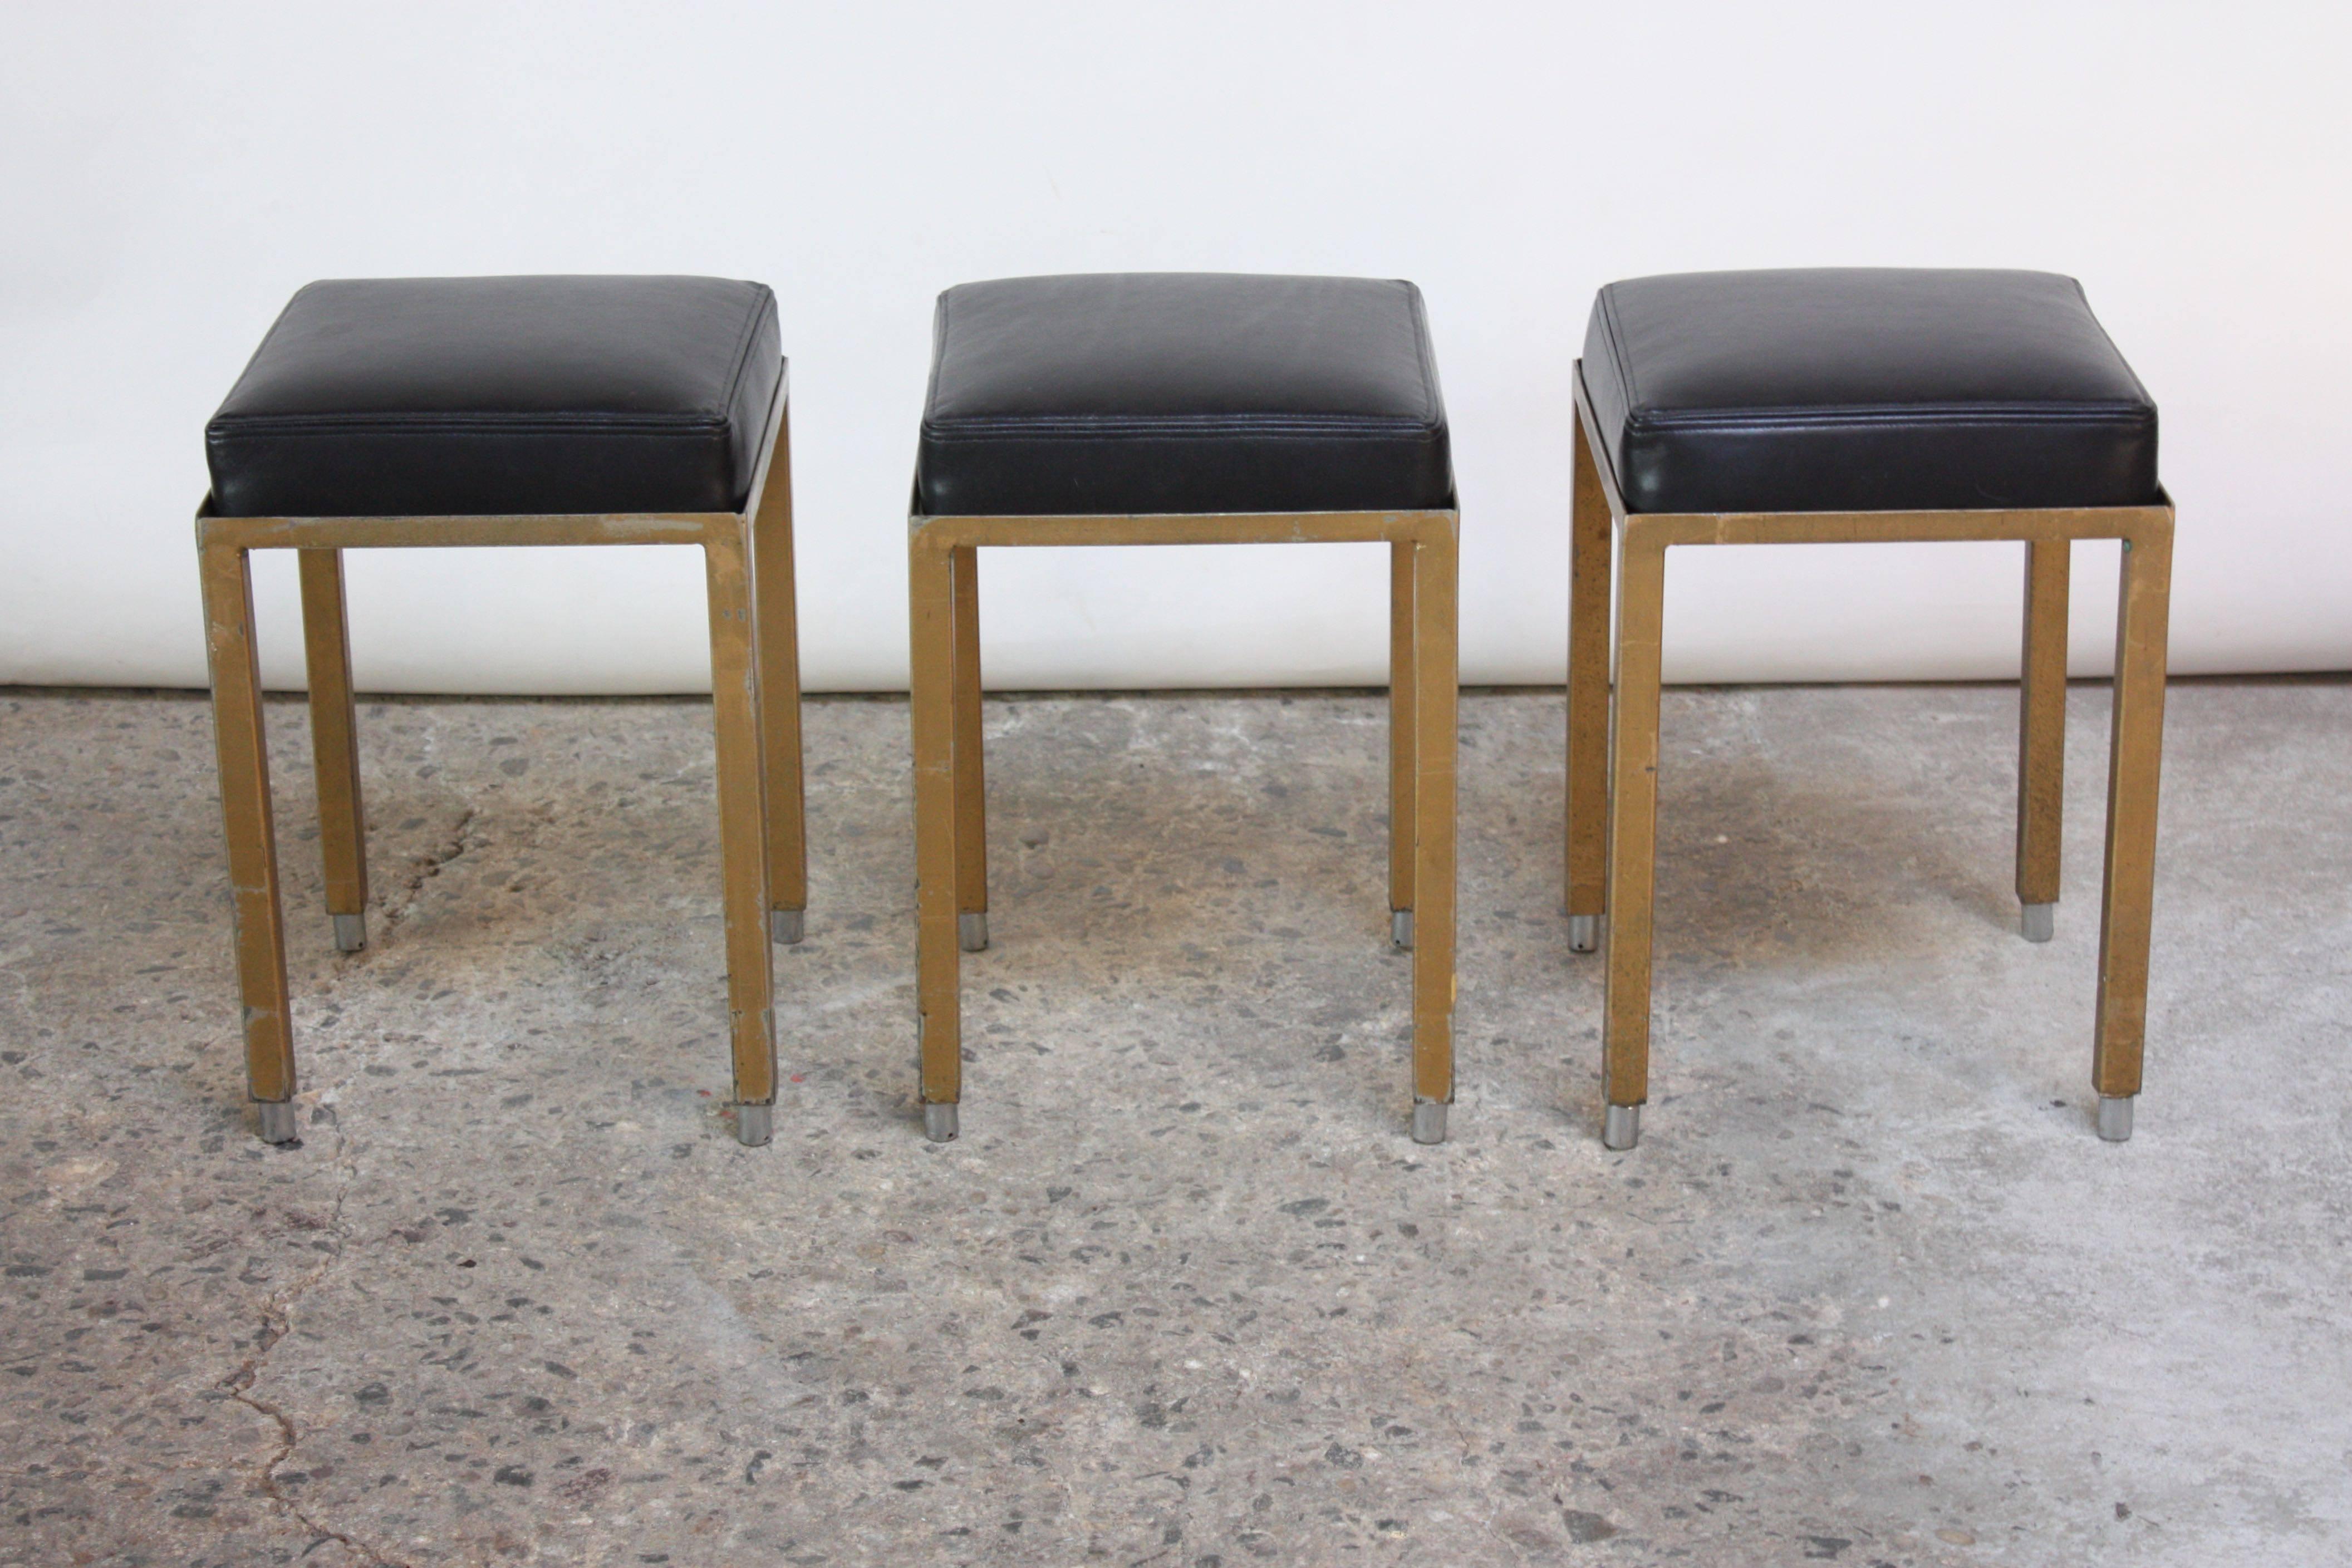 Set of Three Midcentury Industrial Leather and Painted Steel Stools In Good Condition For Sale In Brooklyn, NY